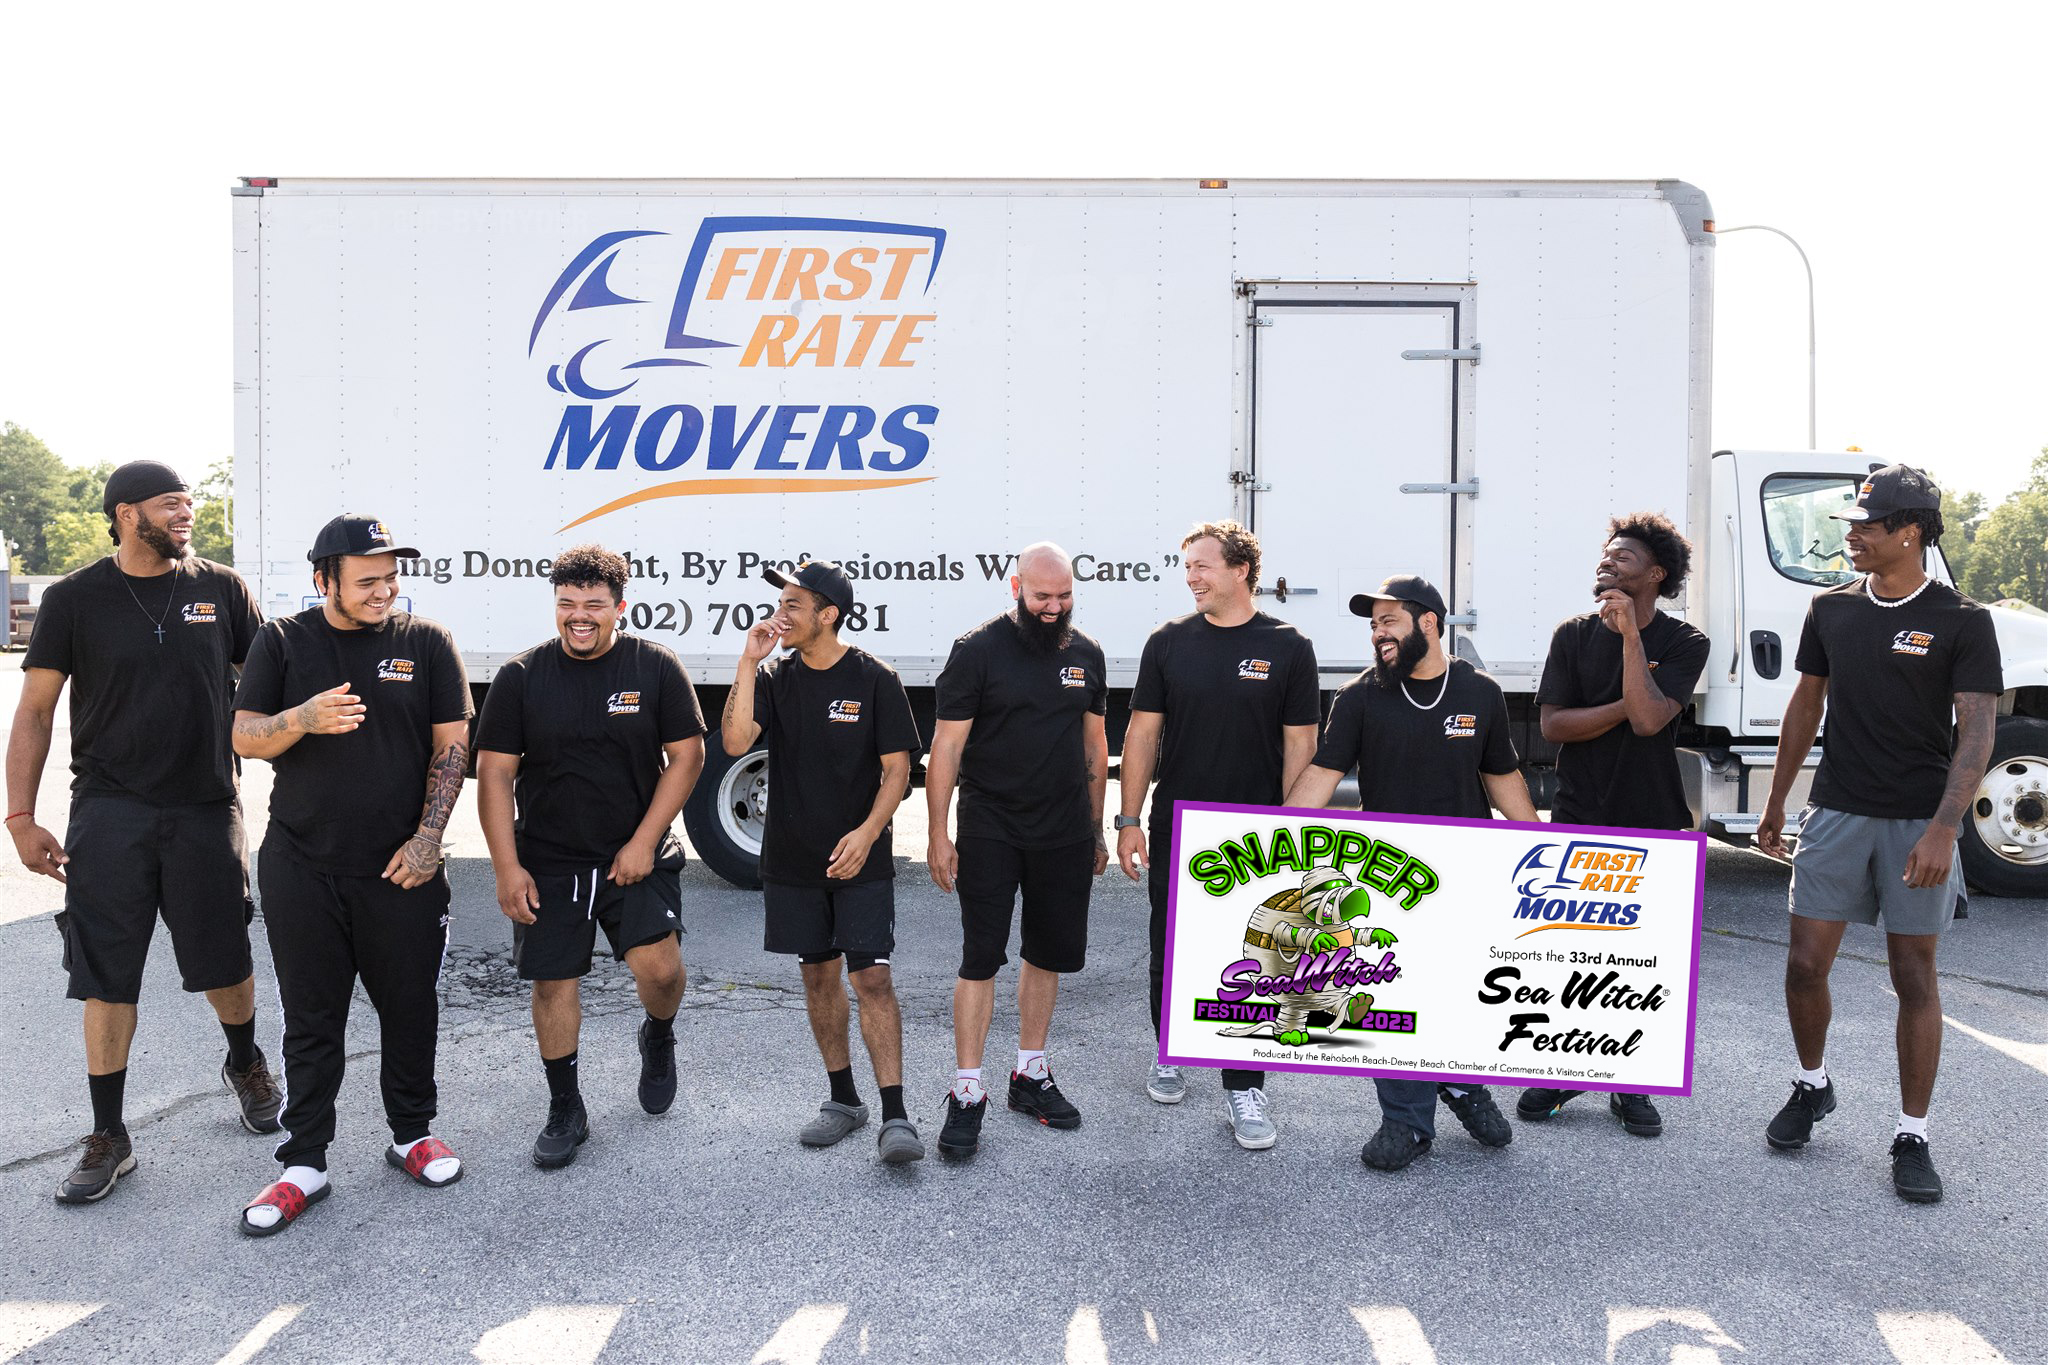 First Rate Movers